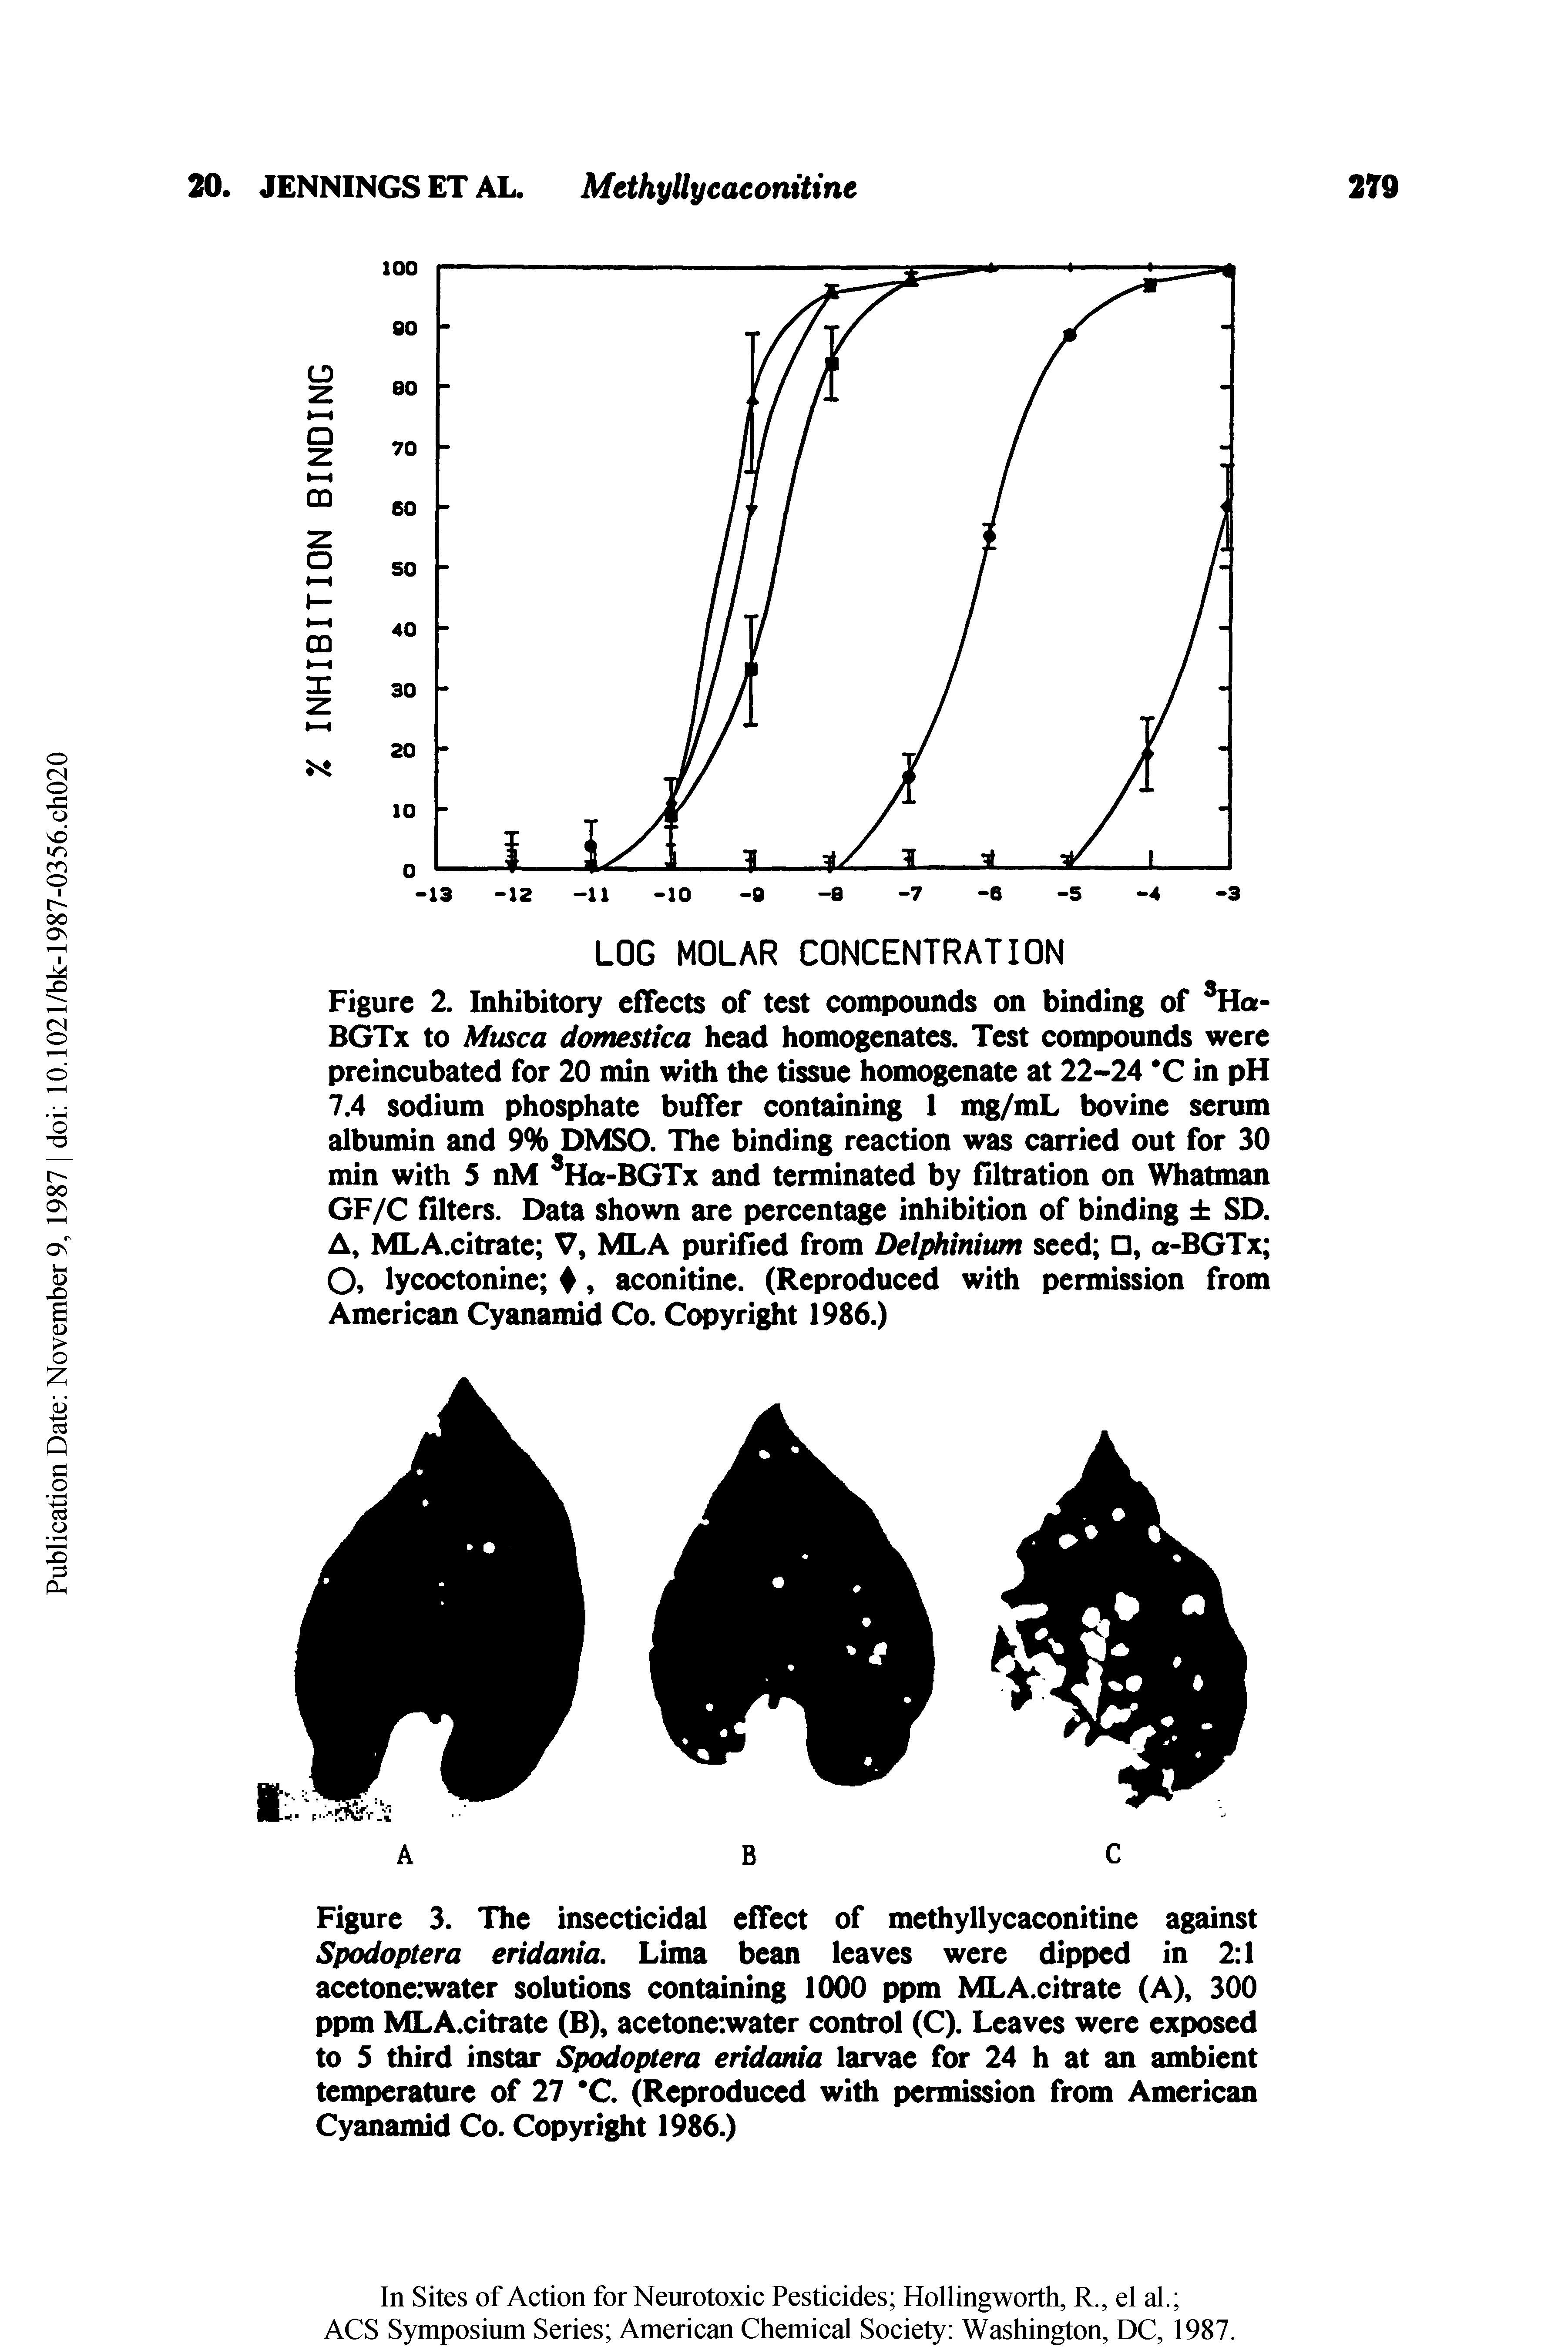 Figure 3. The insecticidal effect of methyllycaconitine against Spodoptera eridania. Lima bean leaves were dipped in 2 1 acetonerwater solutions containing 1000 ppm MLA.citrate (A), 300 ppm MLA.citrate (B), acetone.water control (C). Leaves were exposed to 5 third instar Spodoptera eridania larvae for 24 h at an ambient temperature of 27 C. (Reproduced with permission from American Cyanamid Co. Copyright 1986.)...